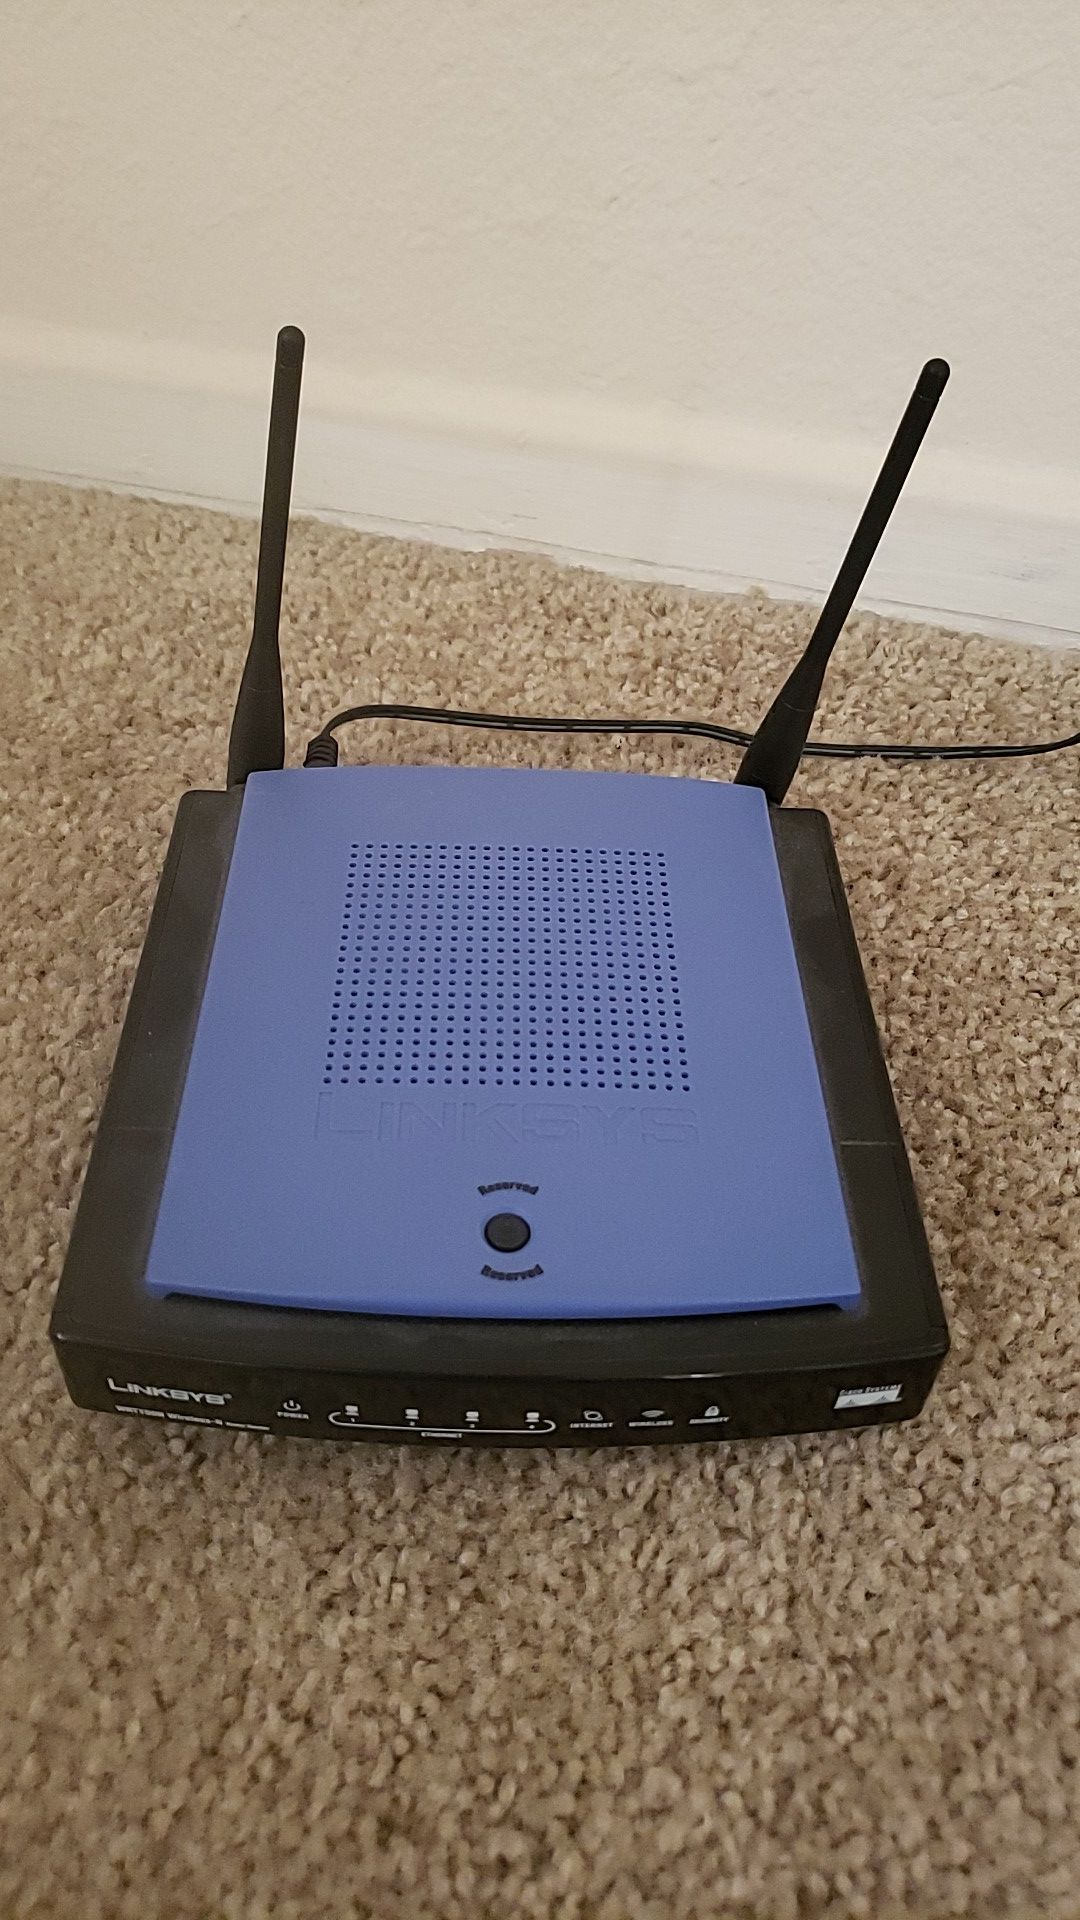 Linksys WRT150N wireless home router